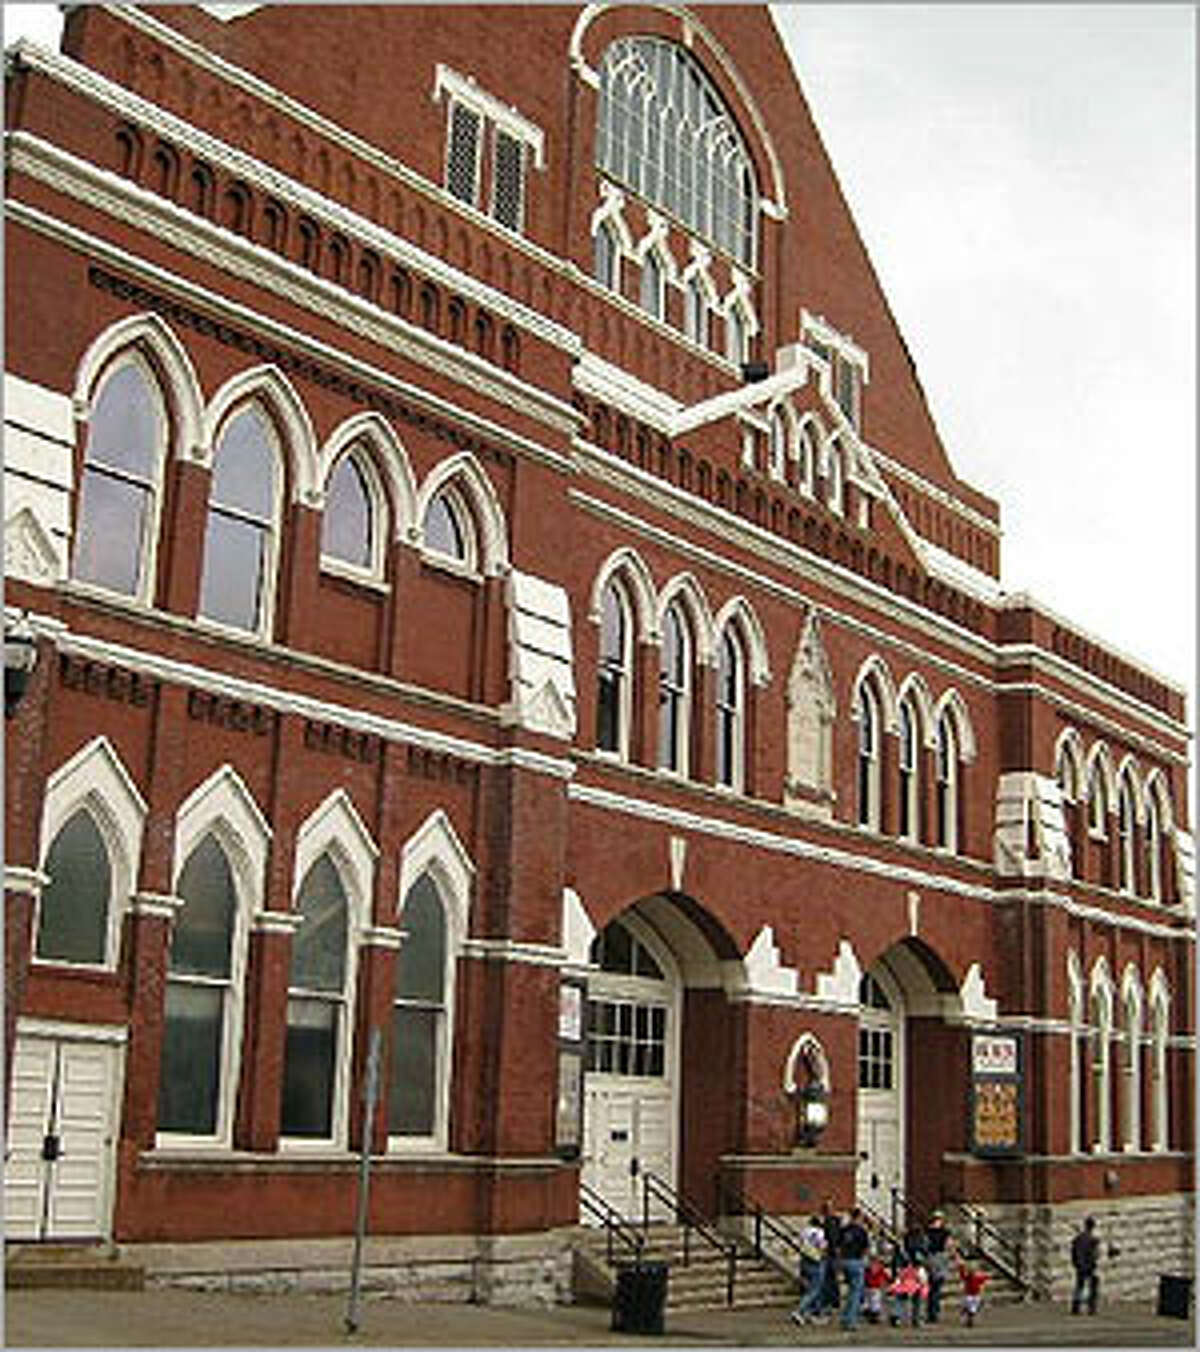 Ryman Auditorium, the original home of the Grand Ole Opry, is open for tours and shows.